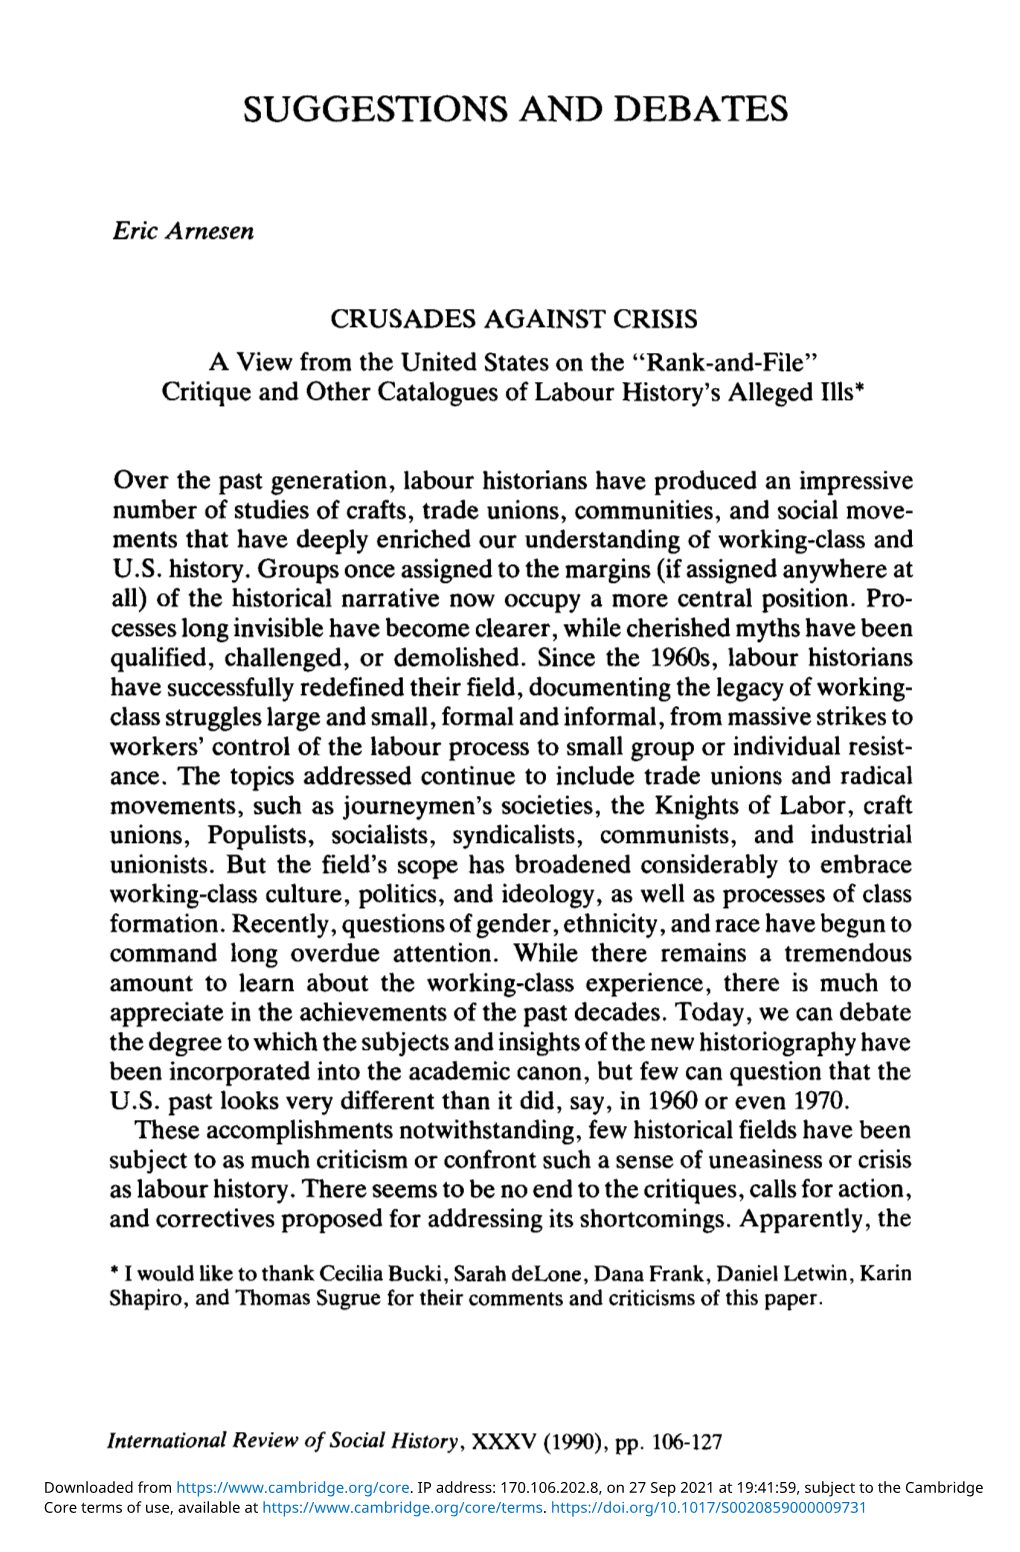 CRUSADES AGAINST CRISIS a View from the United States on the "Rank-And-File" Critique and Other Catalogues of Labour History's Alleged Ills*